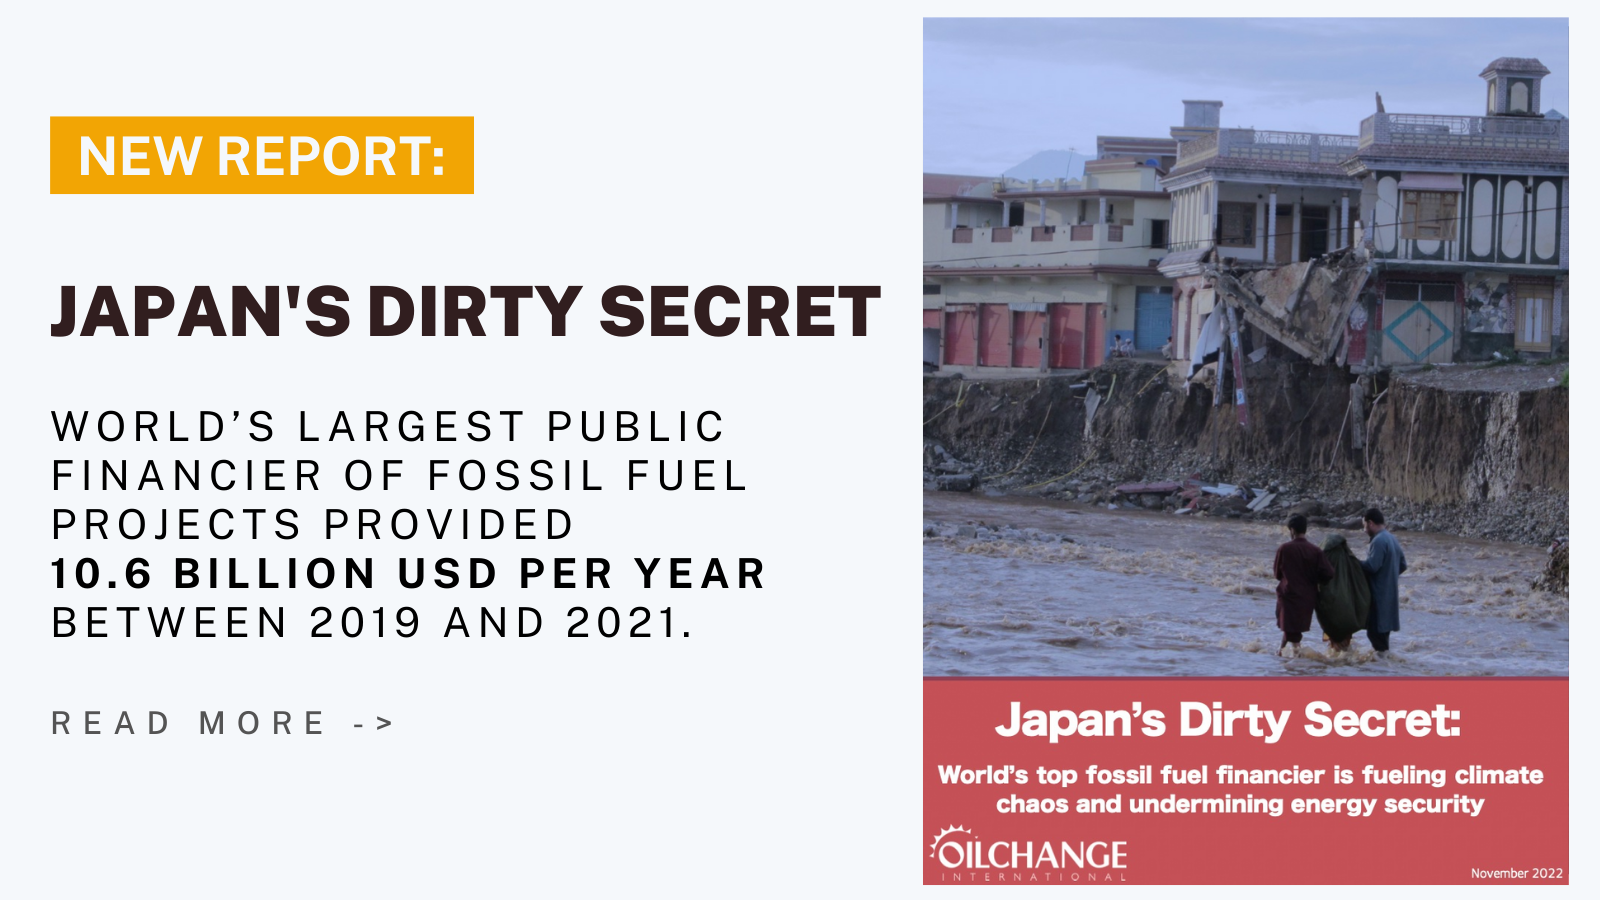 Japan’s Dirty Secret: World’s top fossil fuel financier is fueling climate chaos and undermining energy security